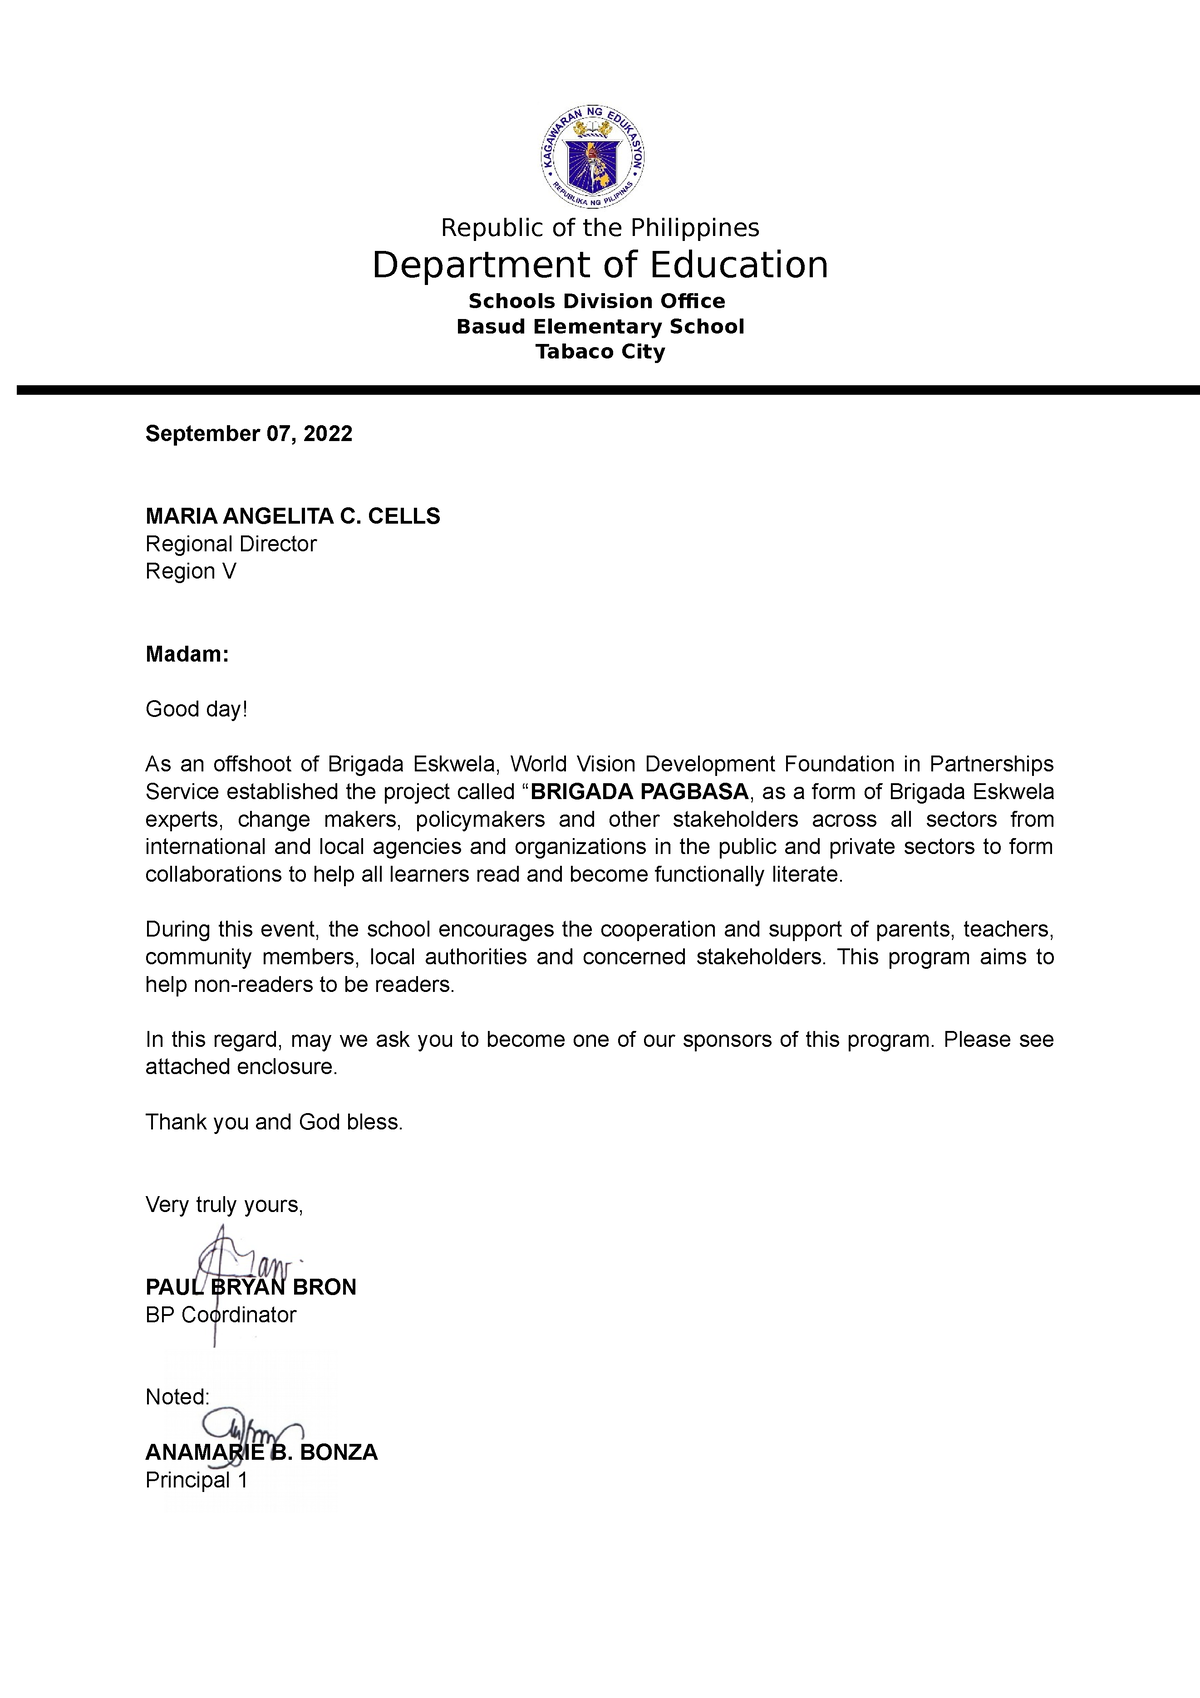 Department of budget management solicitation letter - Republic of the ...